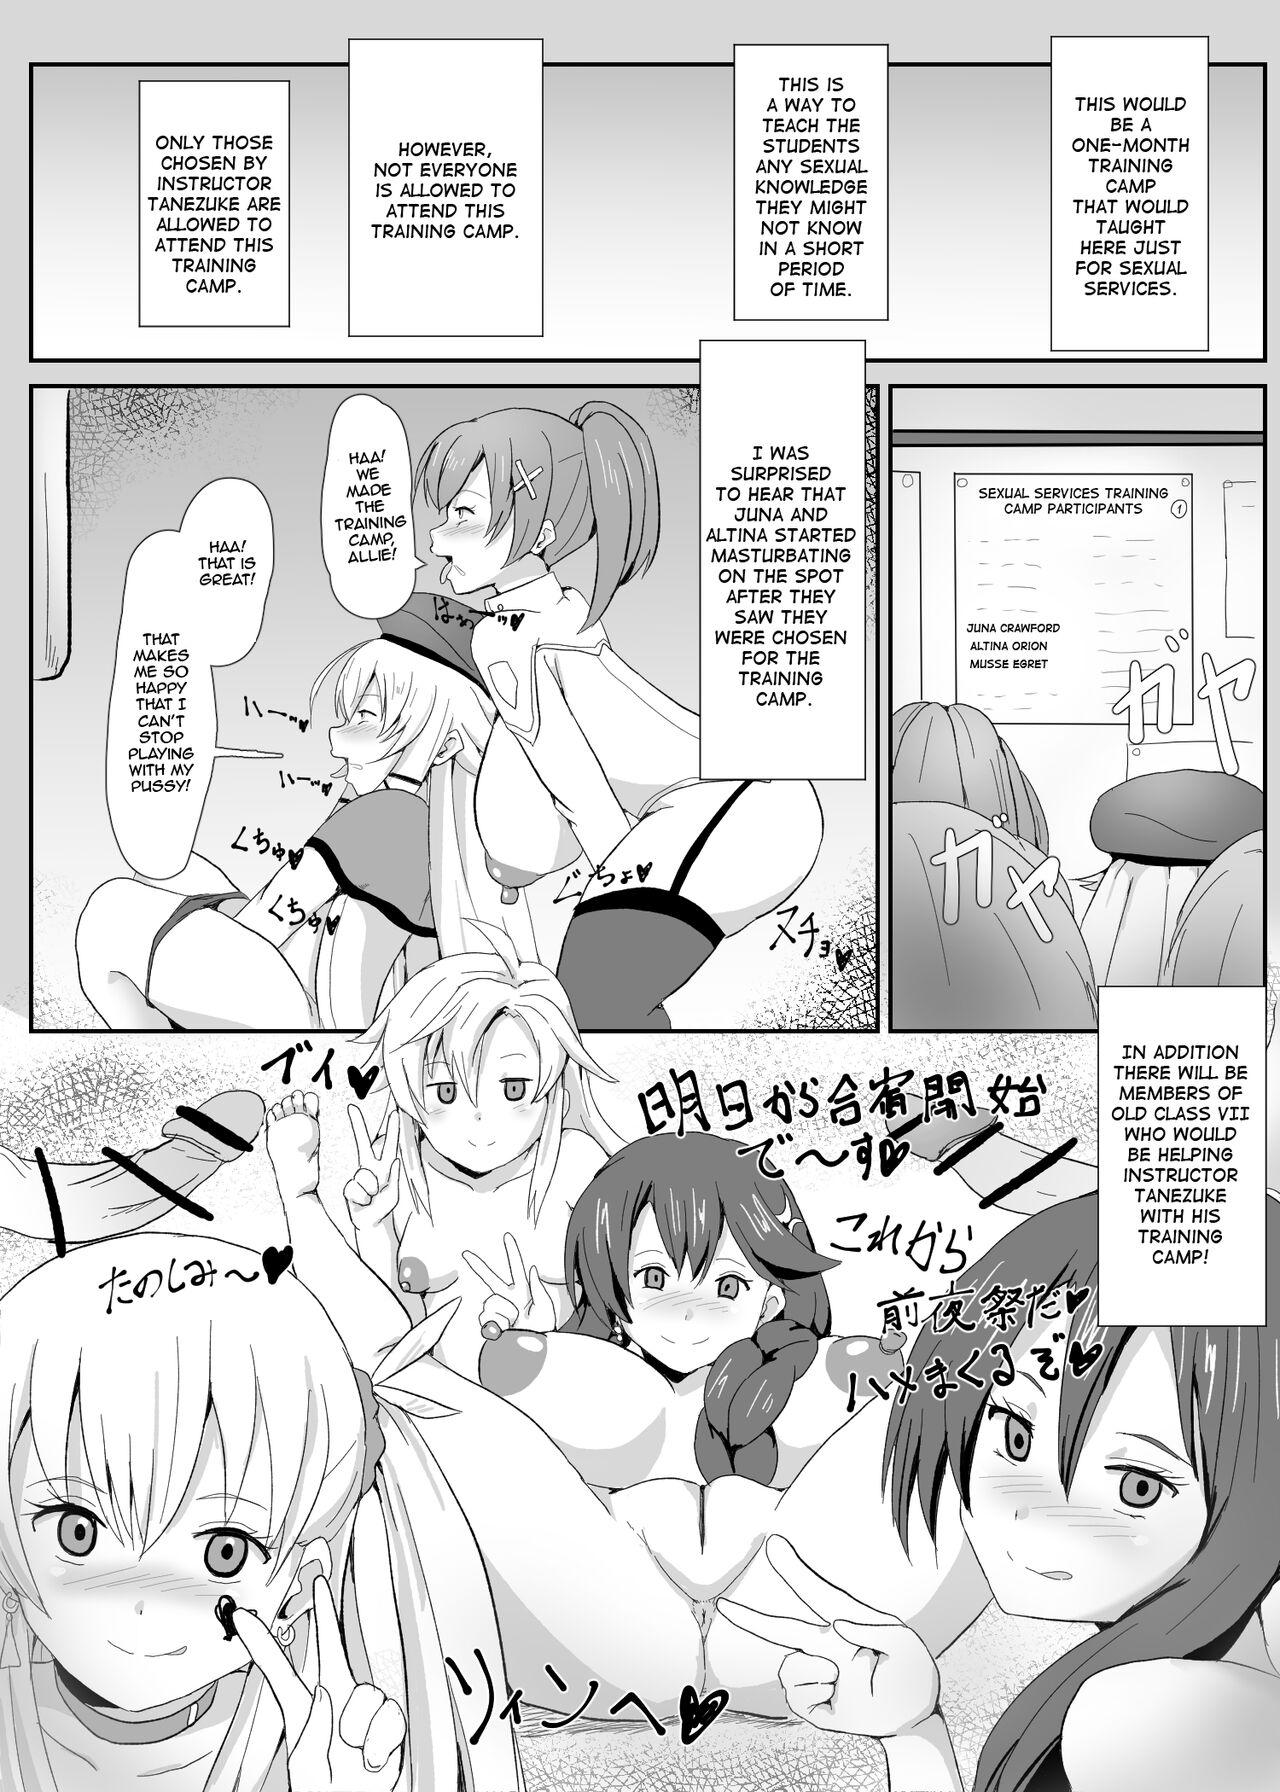 Workout NTR Hypnotic Academy - Prologue - The legend of heroes | eiyuu densetsu Boquete - Page 7